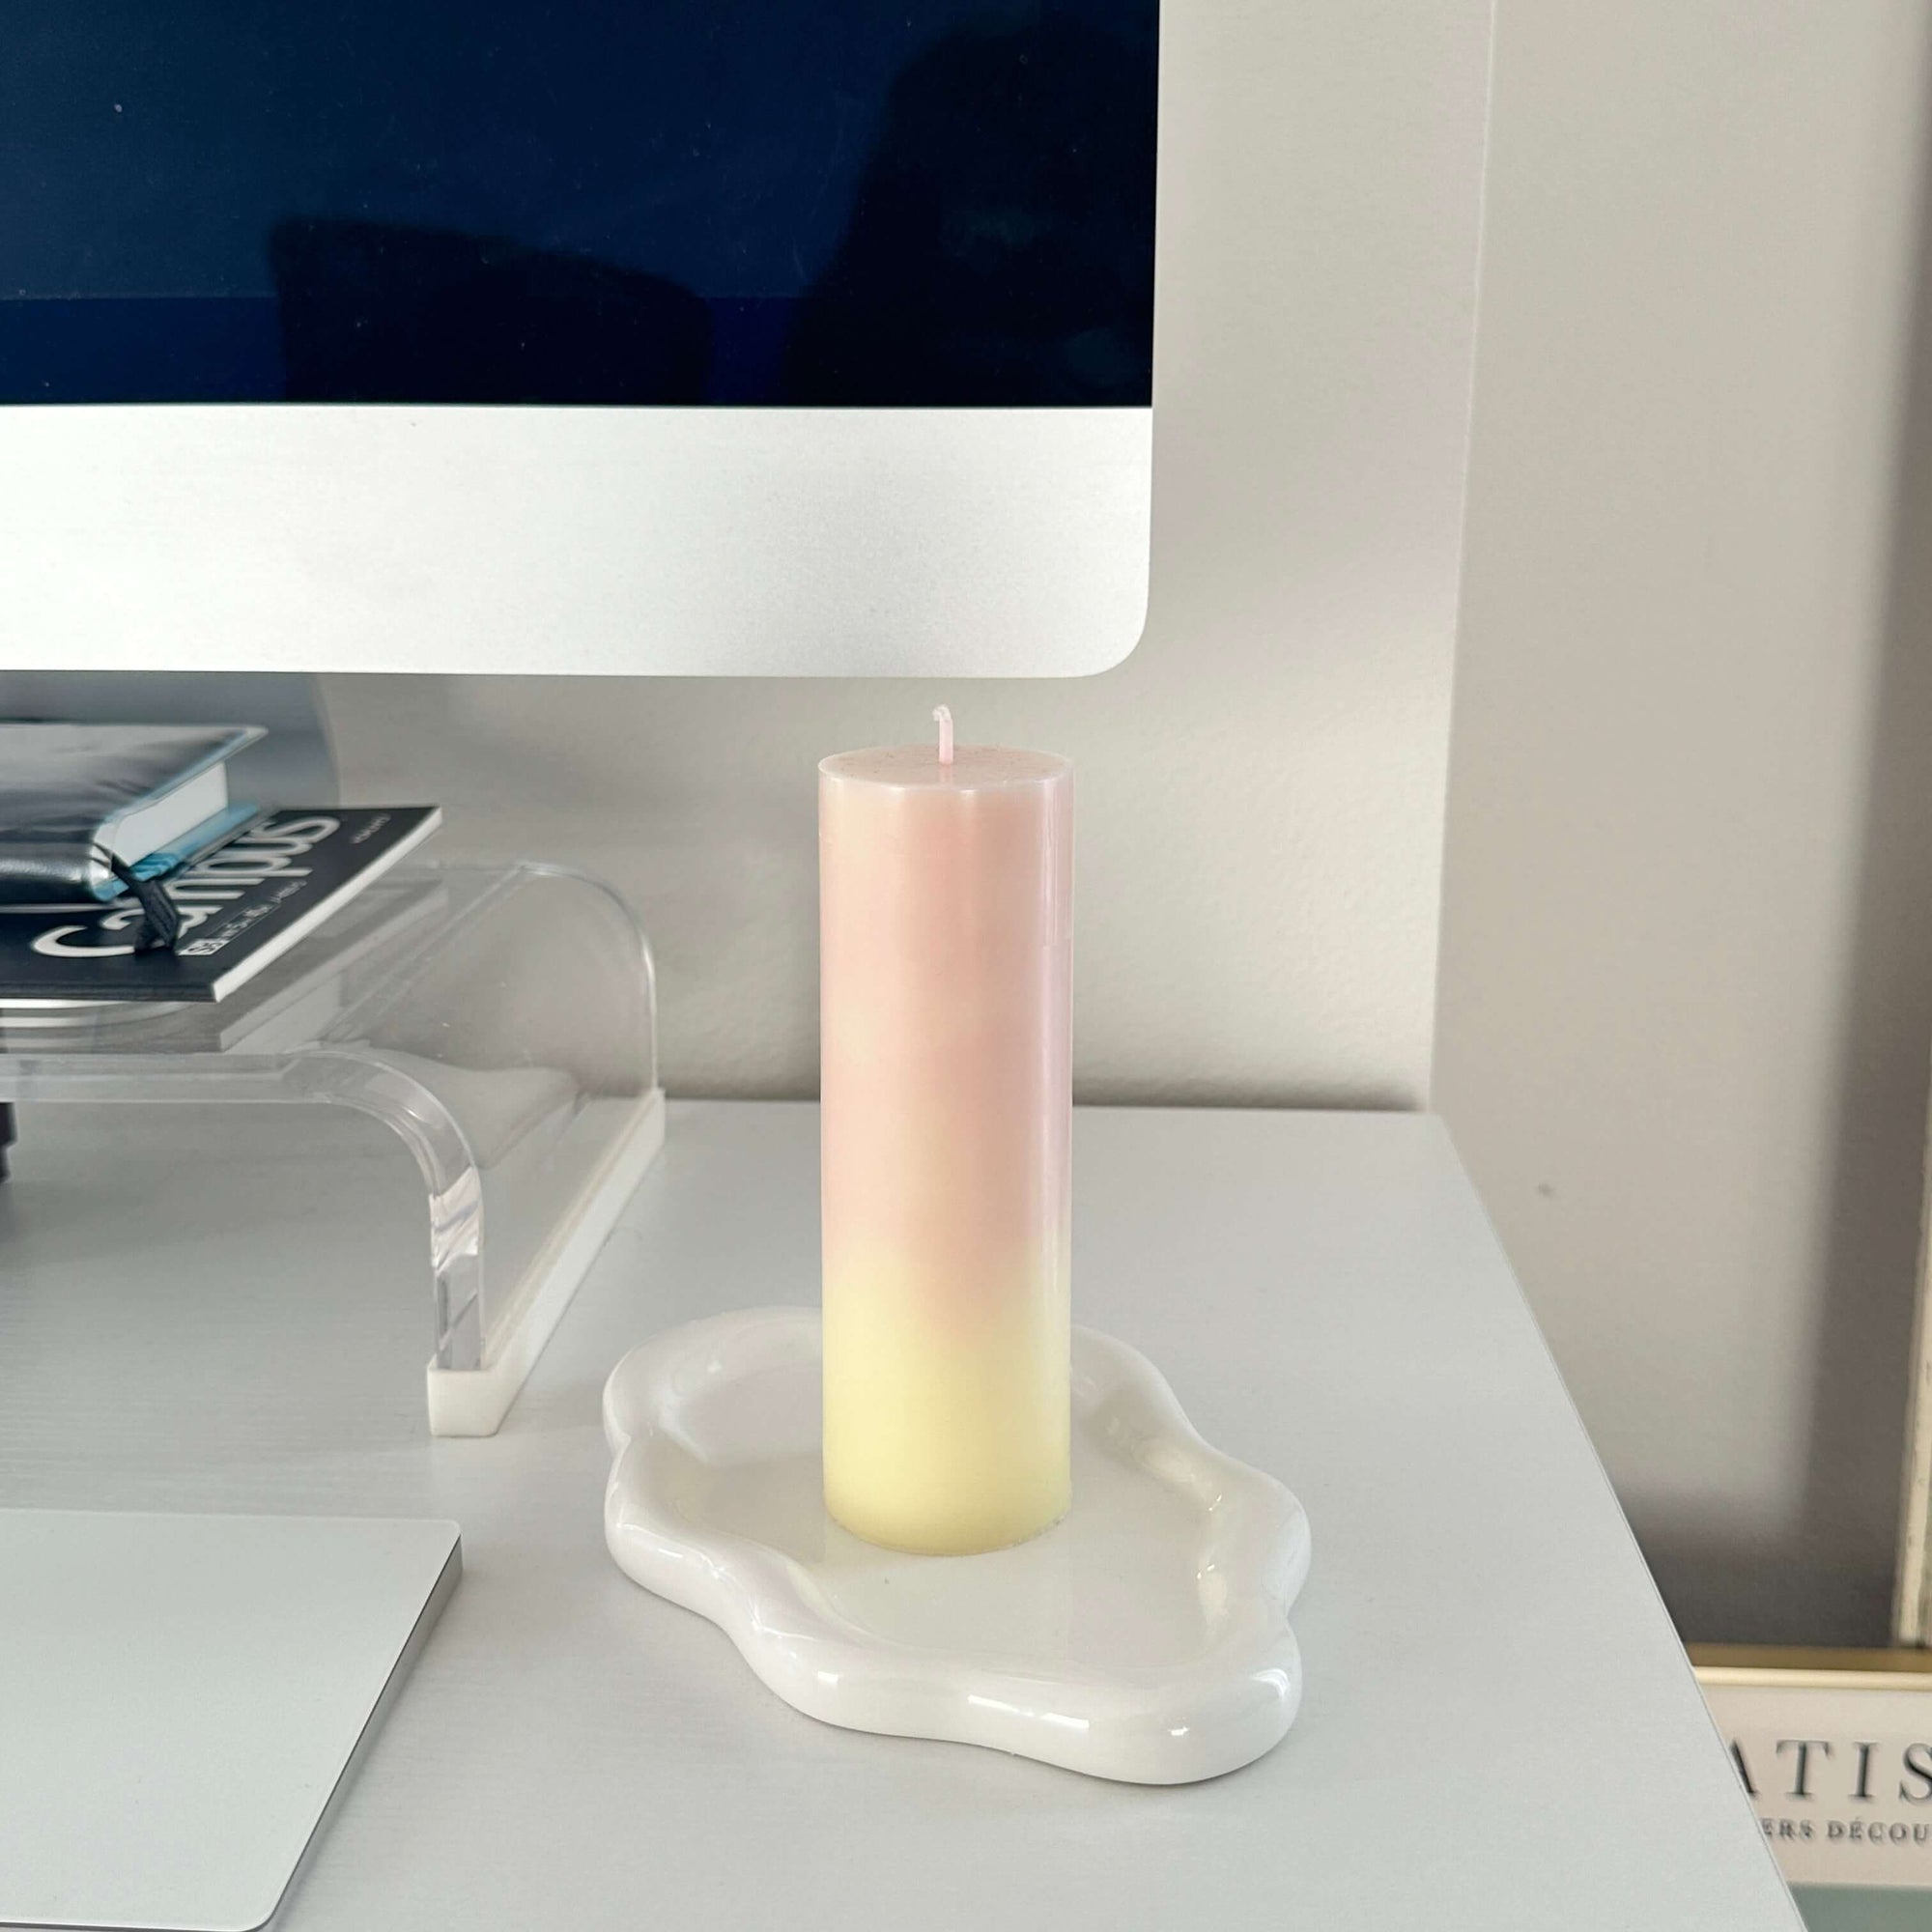 Sweet Morning - Pillar Candle 'Sweet Morning' is a 6-inch pillar candle featuring a lovely orange-to-yellow ombre aesthetic. Featuring a mixture of Lemon and Orange top notes and middle notes of Grapefruit, Mandarin, and Agave. Perfect for: Those busy mor